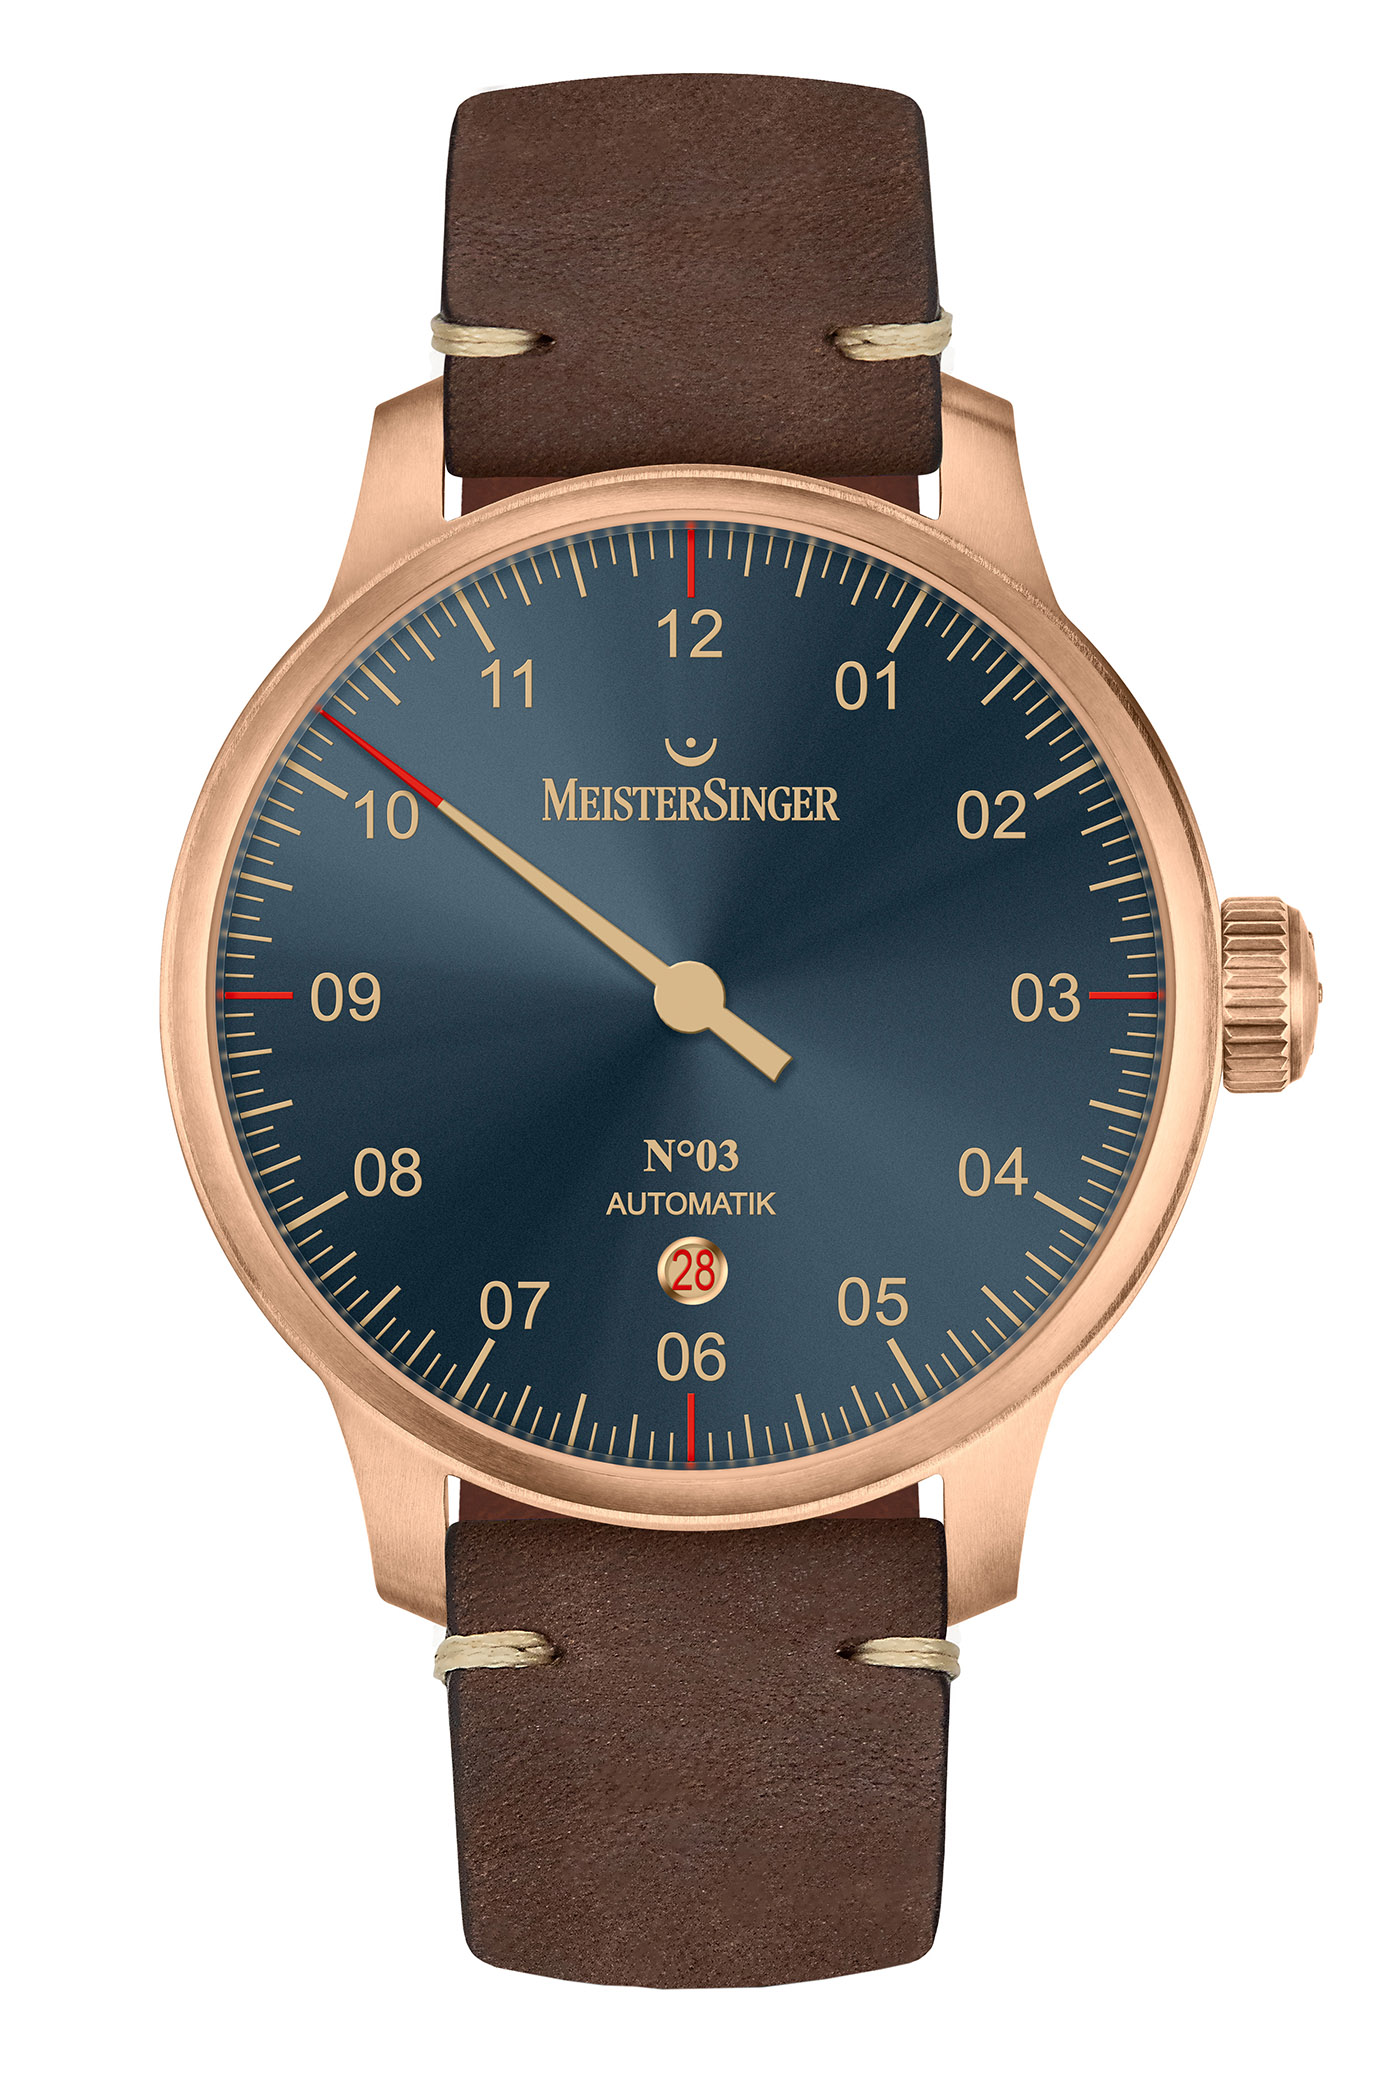 Baselworld 2019 - MeisterSinger Bronze Editions No. 03, Perigraph and Metris - 3